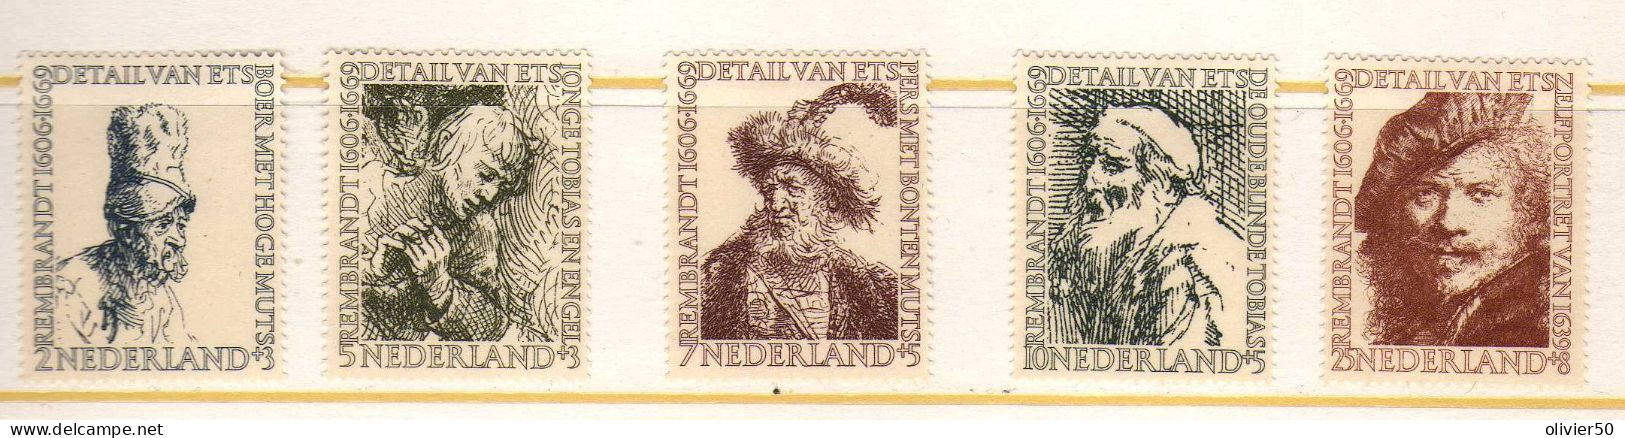 Pays-Bas -1956 - Rembrandt -  Neufs* - MLH - Unused Stamps